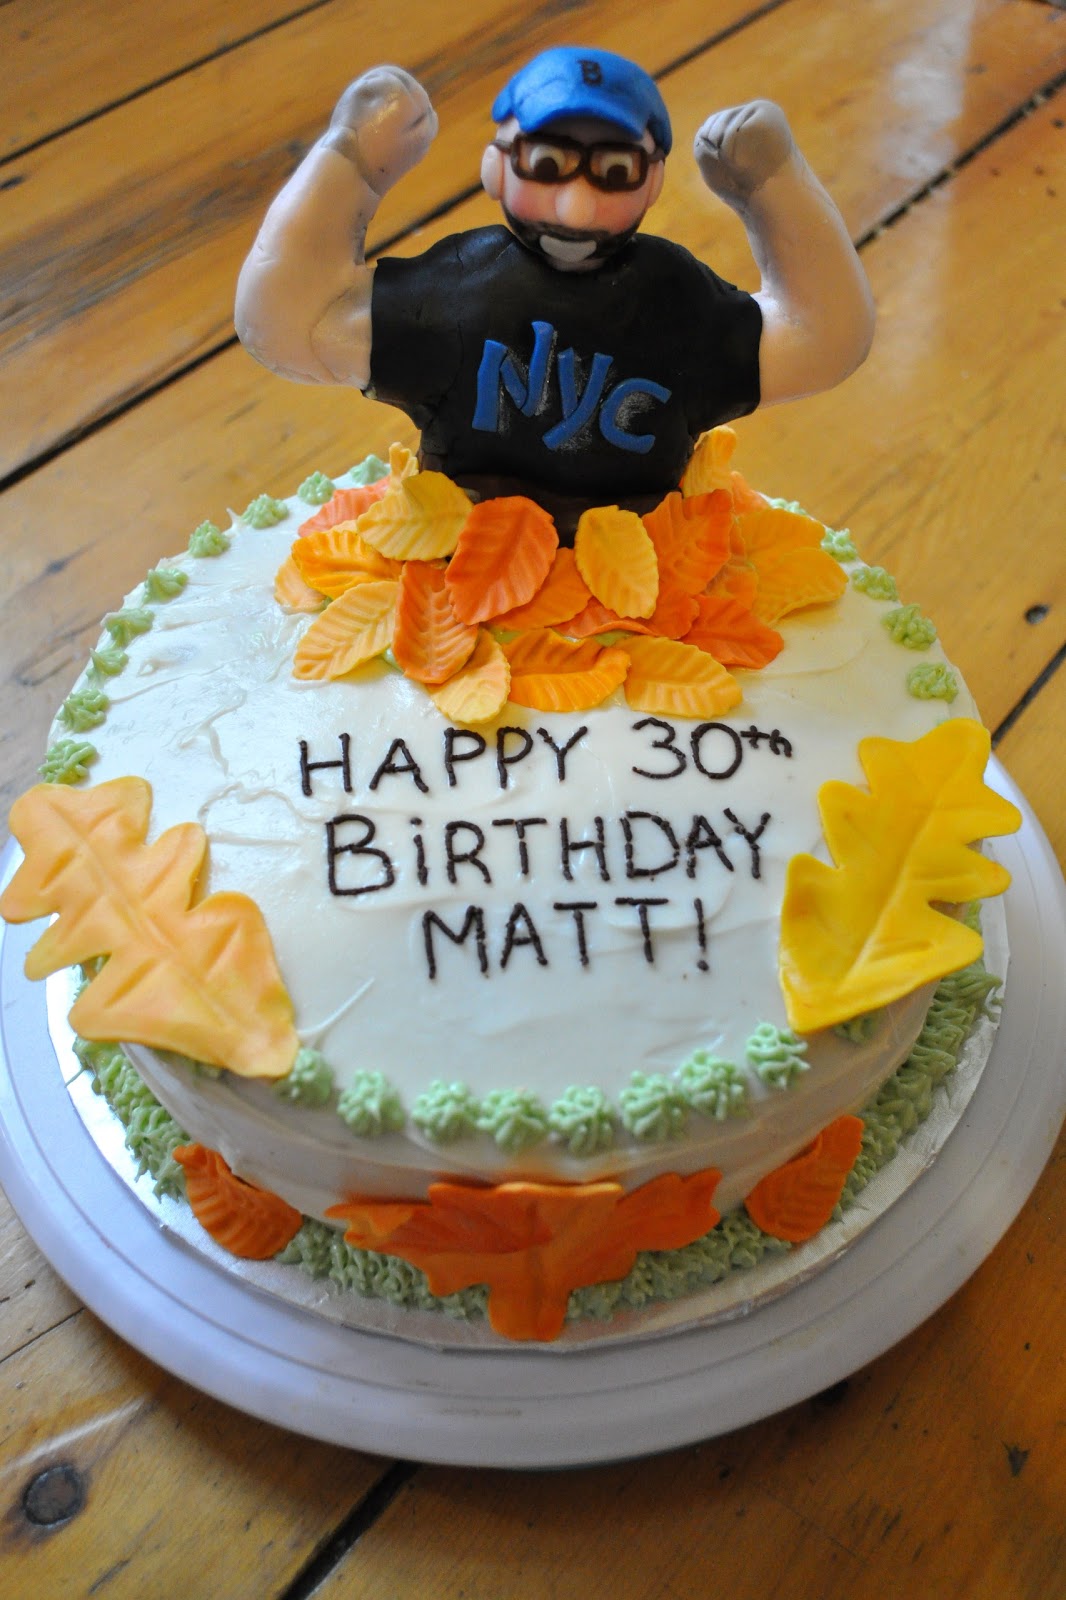 This cake captures Matt in many ways: the guns, the Boston cap for the Red ...